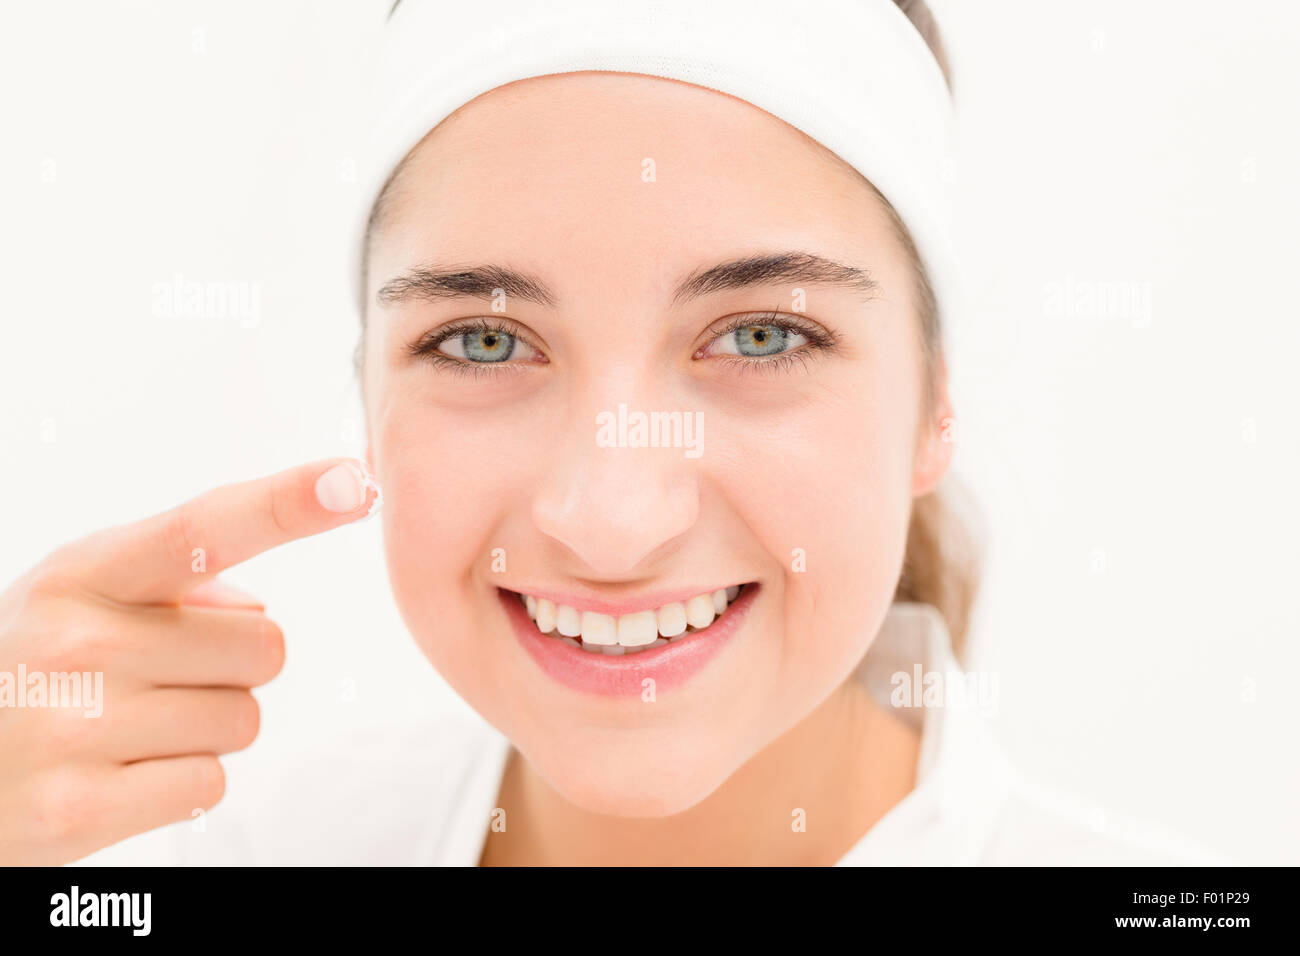 portrait eautiful smiling woman Mid section of woman applying cream Stock Photo